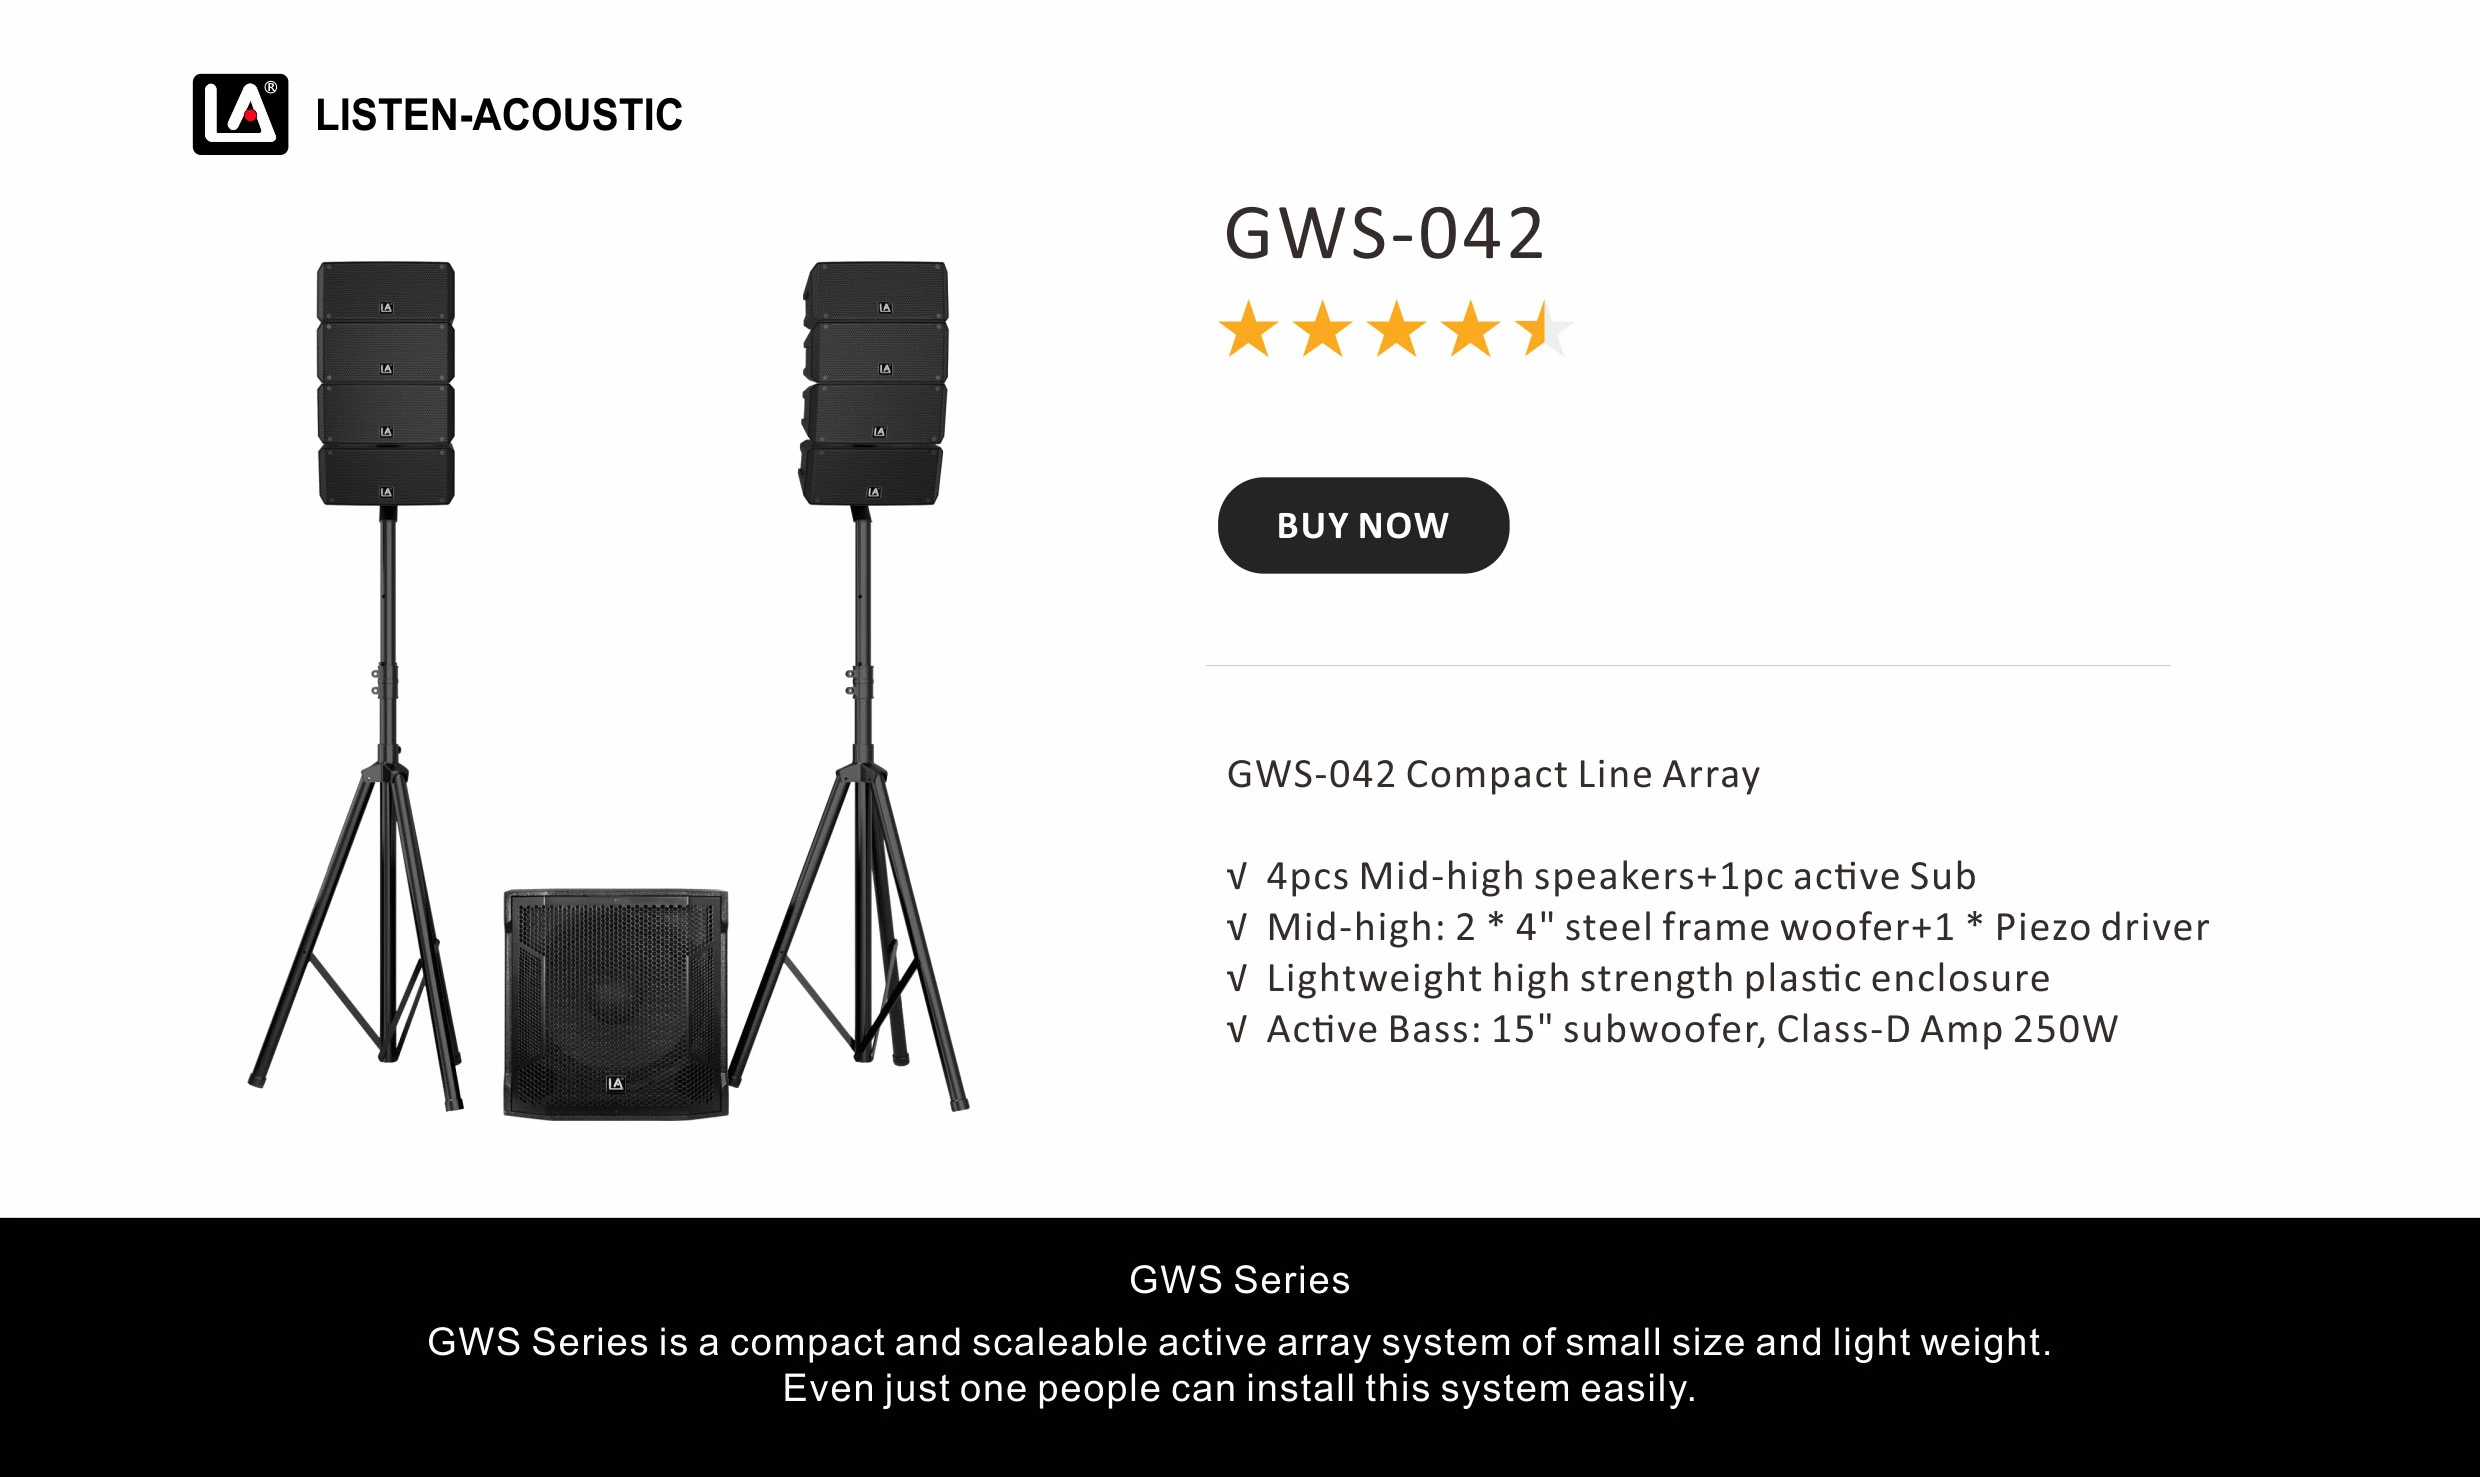 compact line array systems, compact line array system, array compact, Line Array GWS-042, Line Array GWS Series